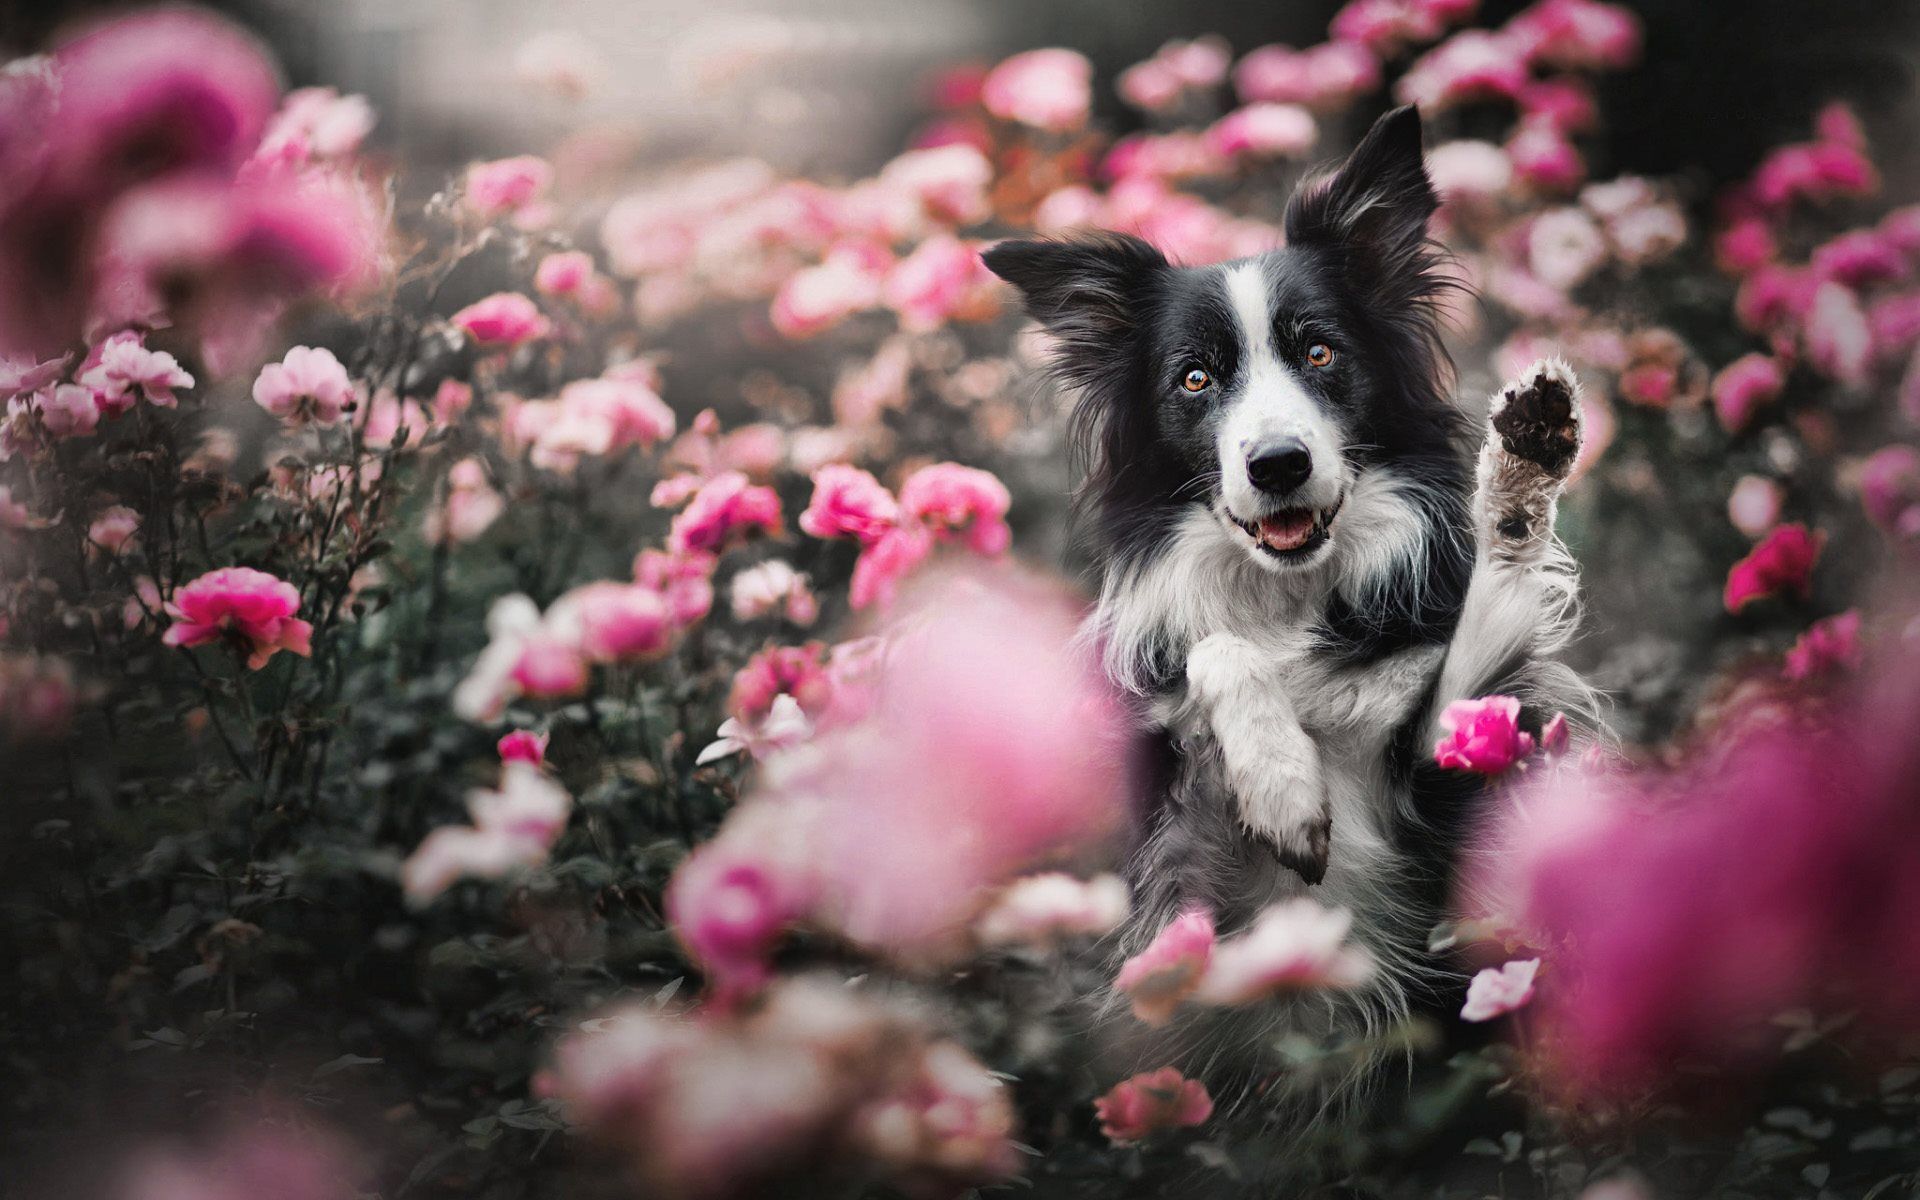 Download wallpaper Border Collie in flower, bokeh, cute animals, black dog in flower, pets, spring, black border collie, dogs, Border Collie Dog for desktop with resolution 1920x1200. High Quality HD picture wallpaper